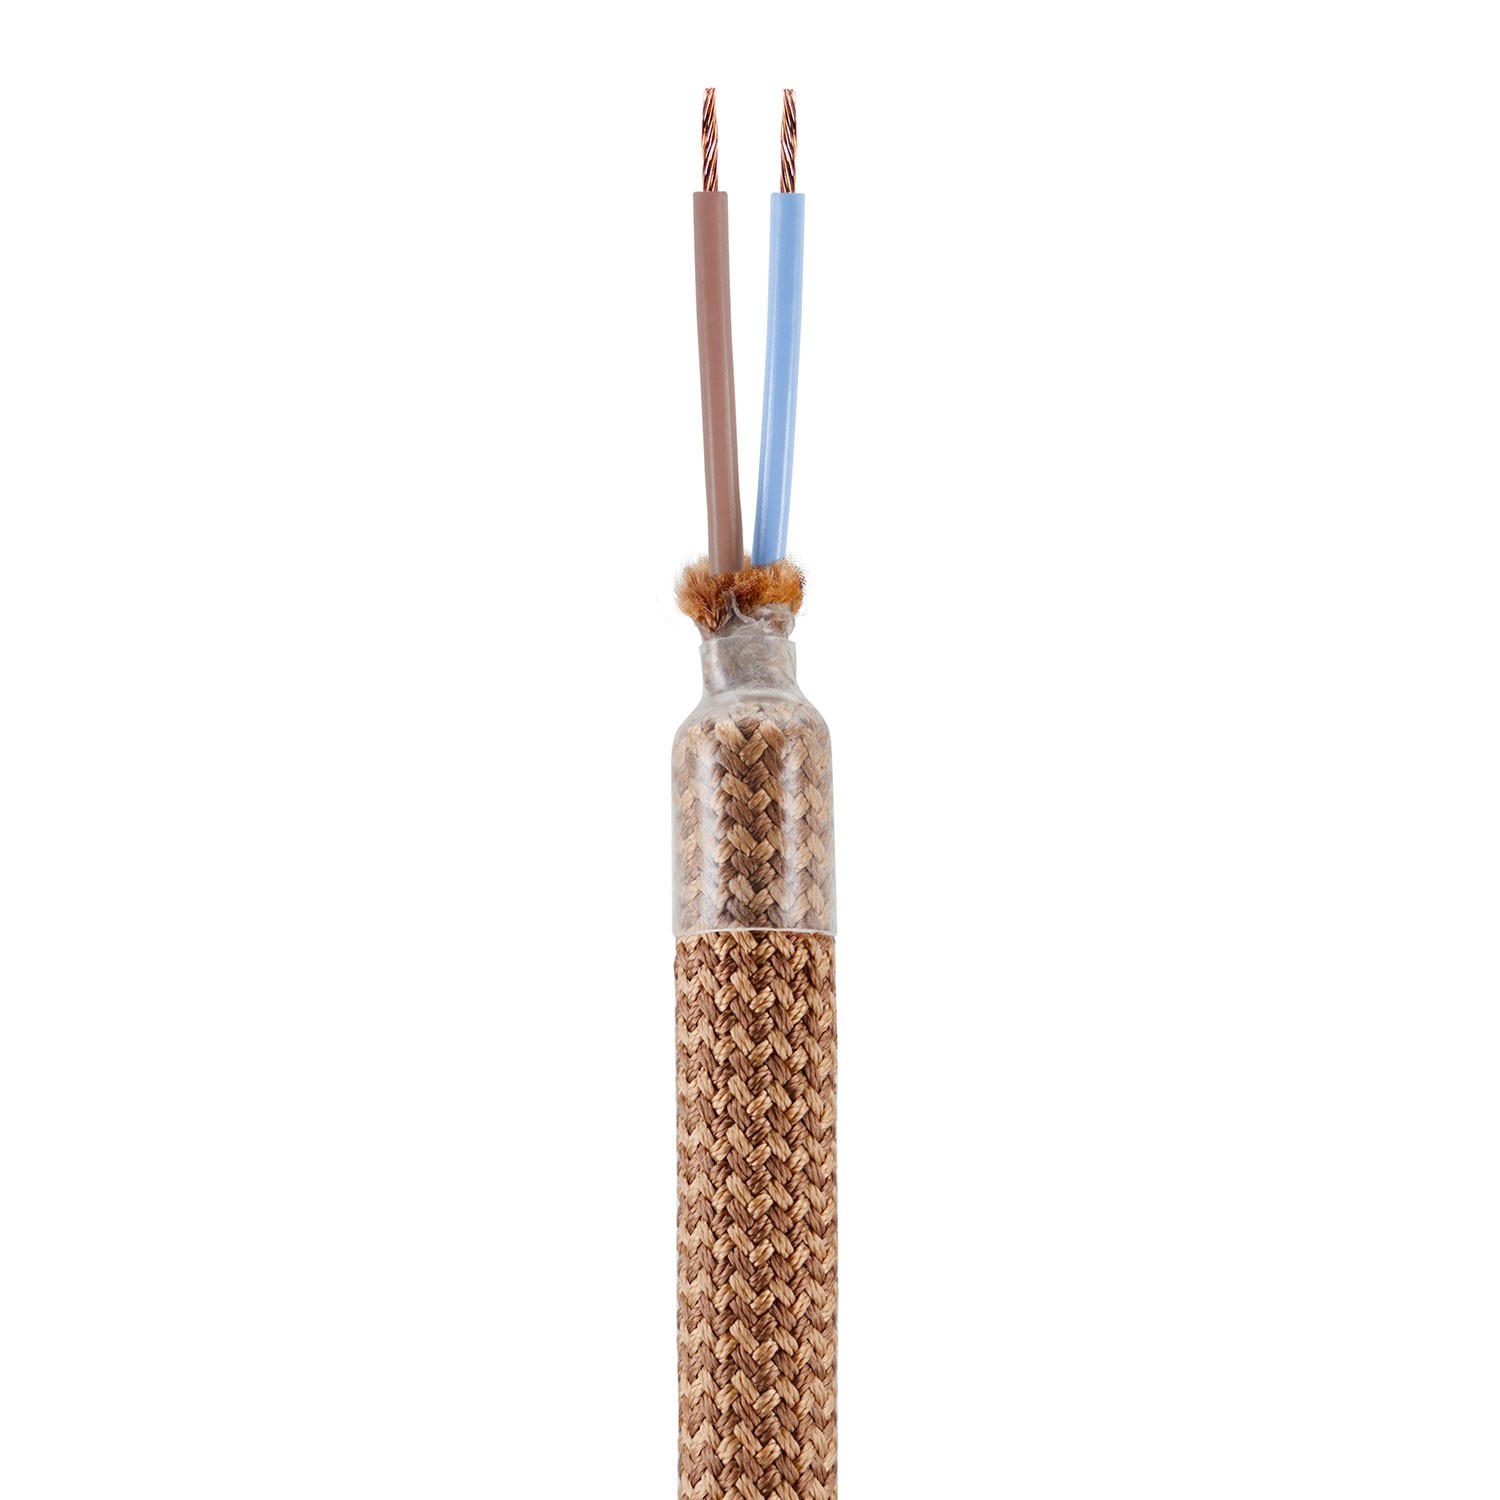 Kit Creative Flex flexible tube covered in Copper RM74 fabric with metal terminals